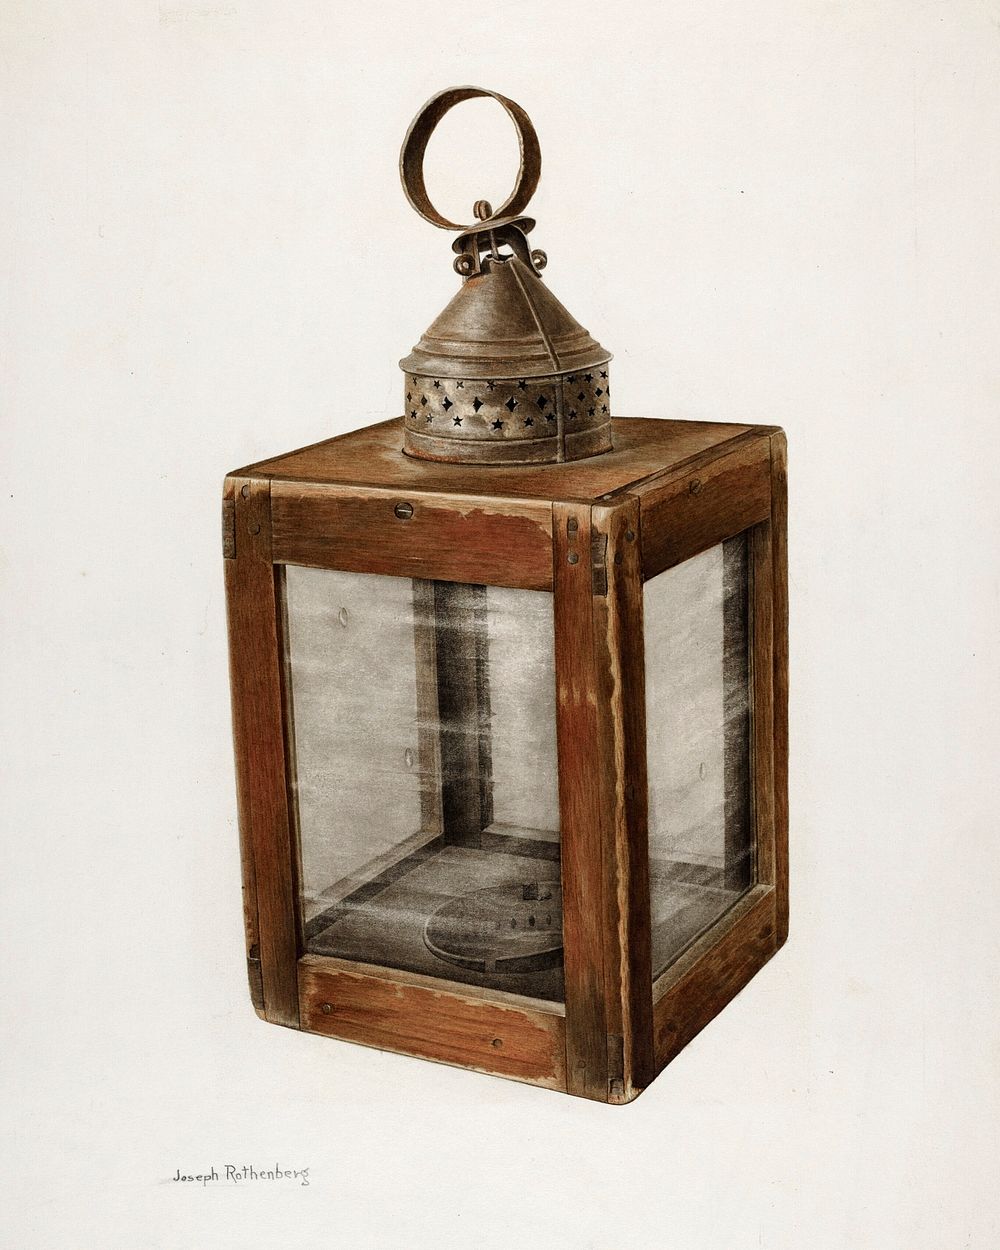 Hand Lantern (ca. 1938) by Joseph Rothenberg. Original from The National Gallery of Art. Digitally enhanced by rawpixel.